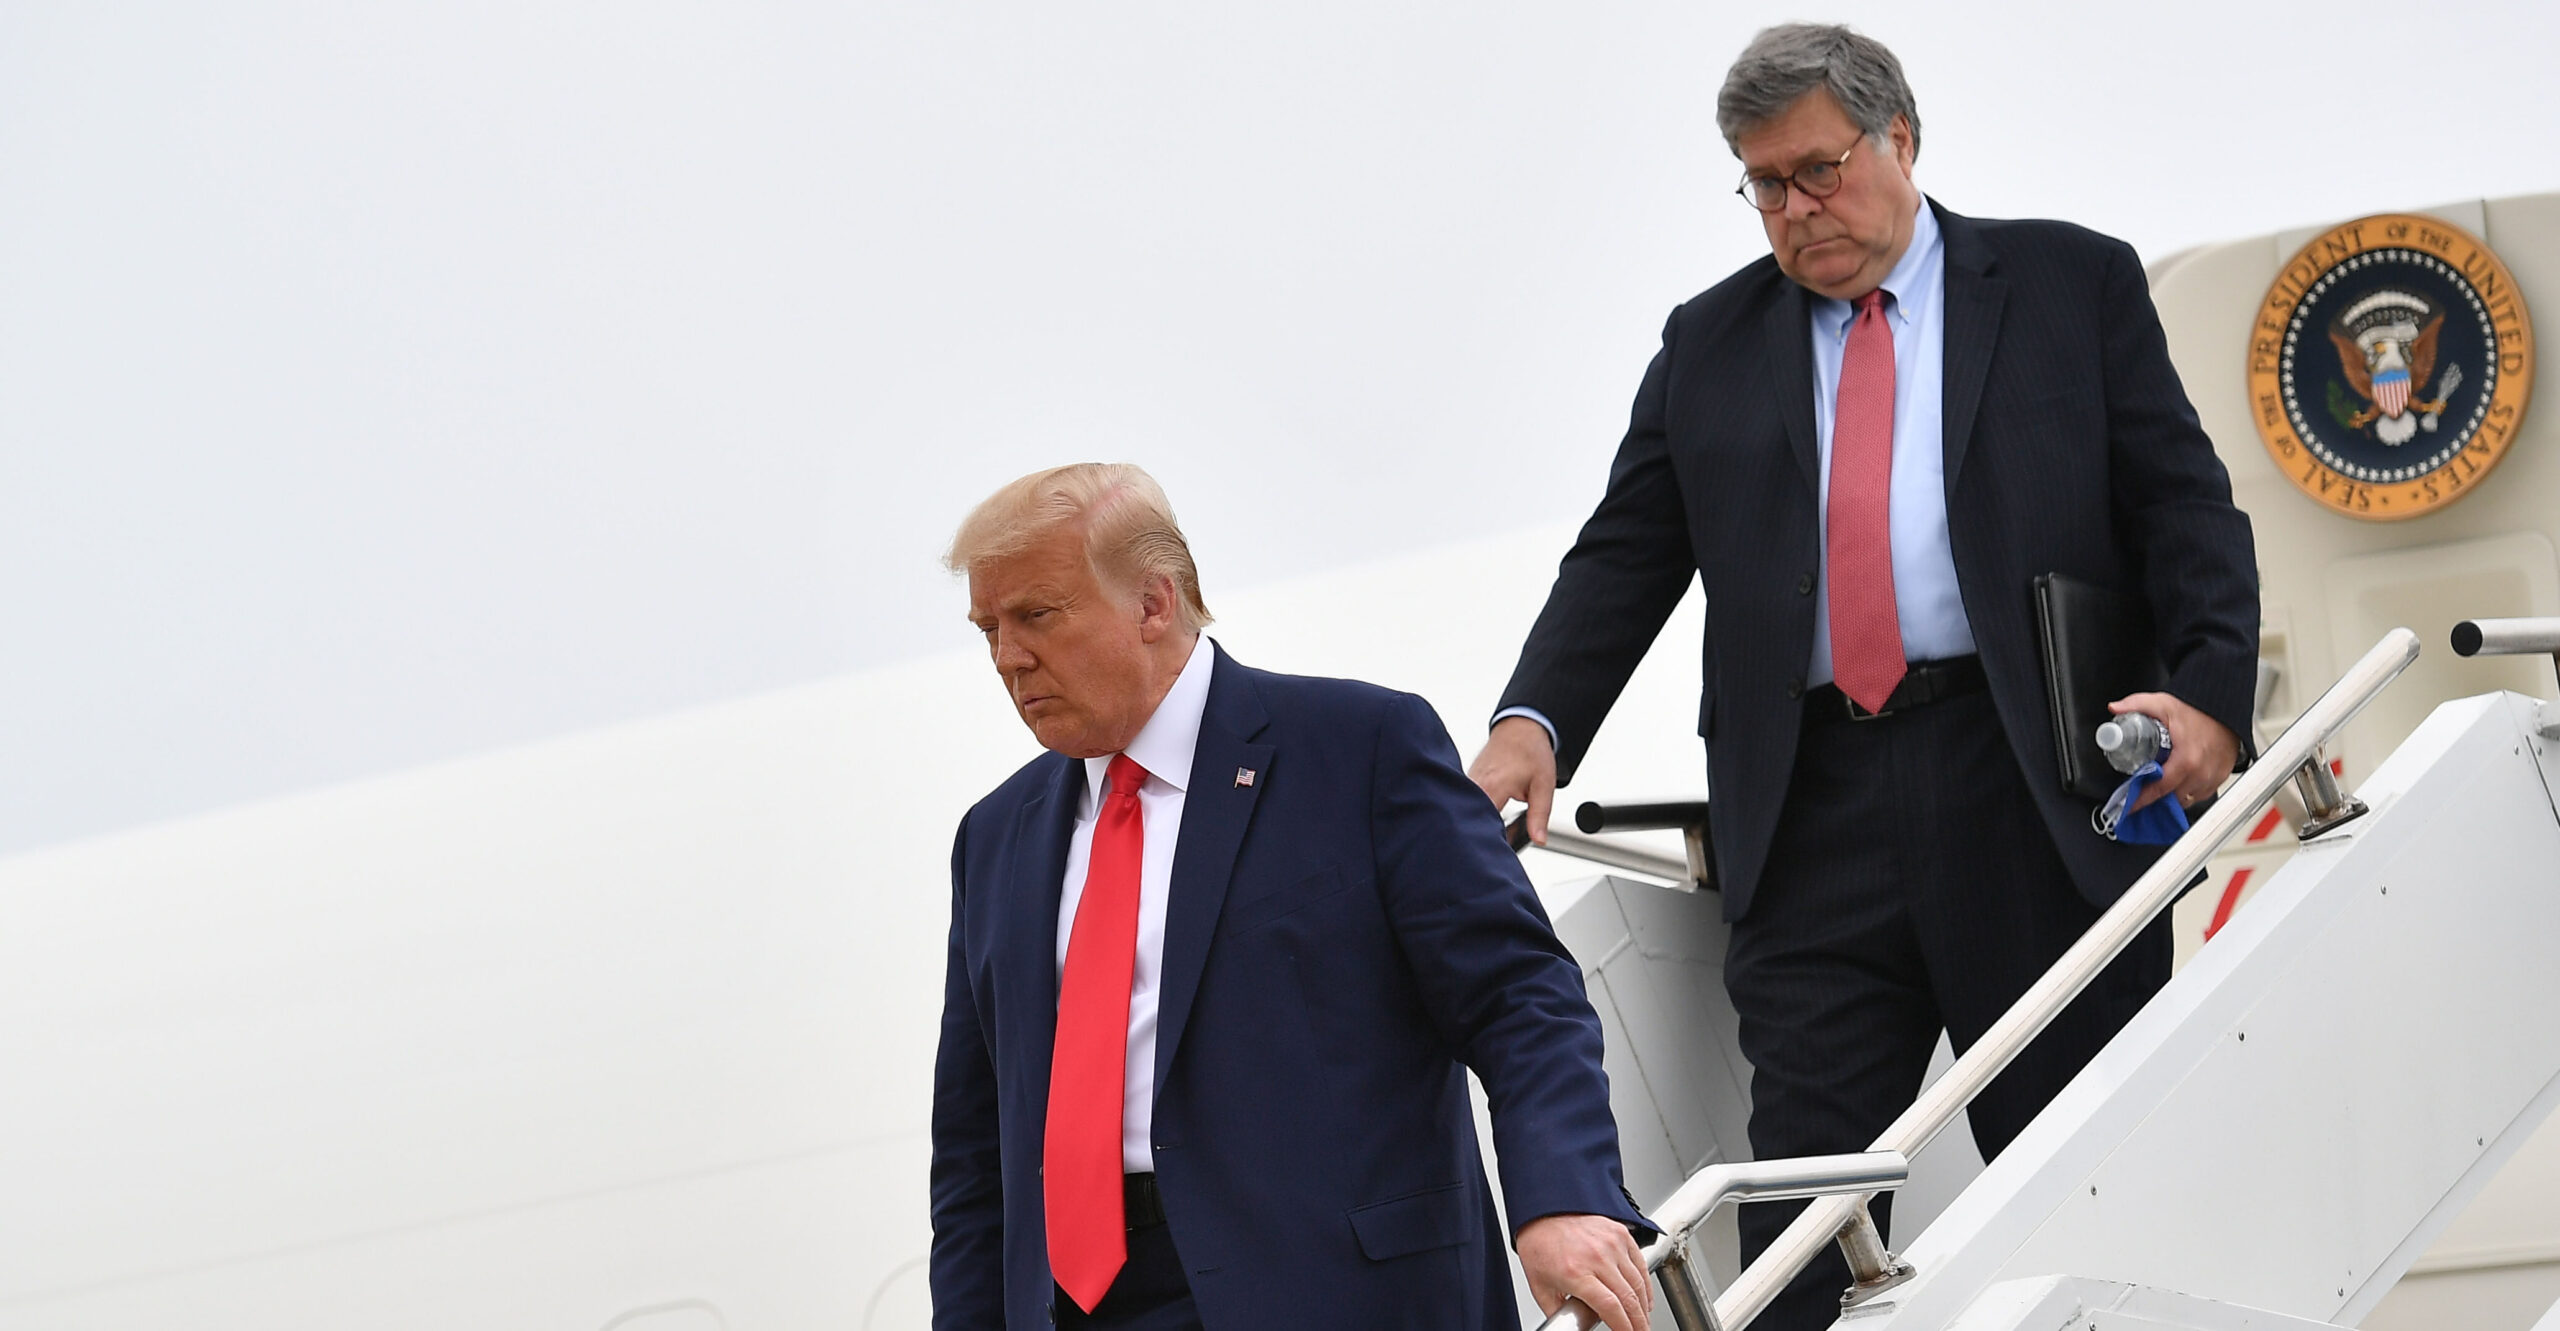 Trump Brands Barr, McConnell RINOs for Dismissing Claims of 'Rigged' 2020 Election